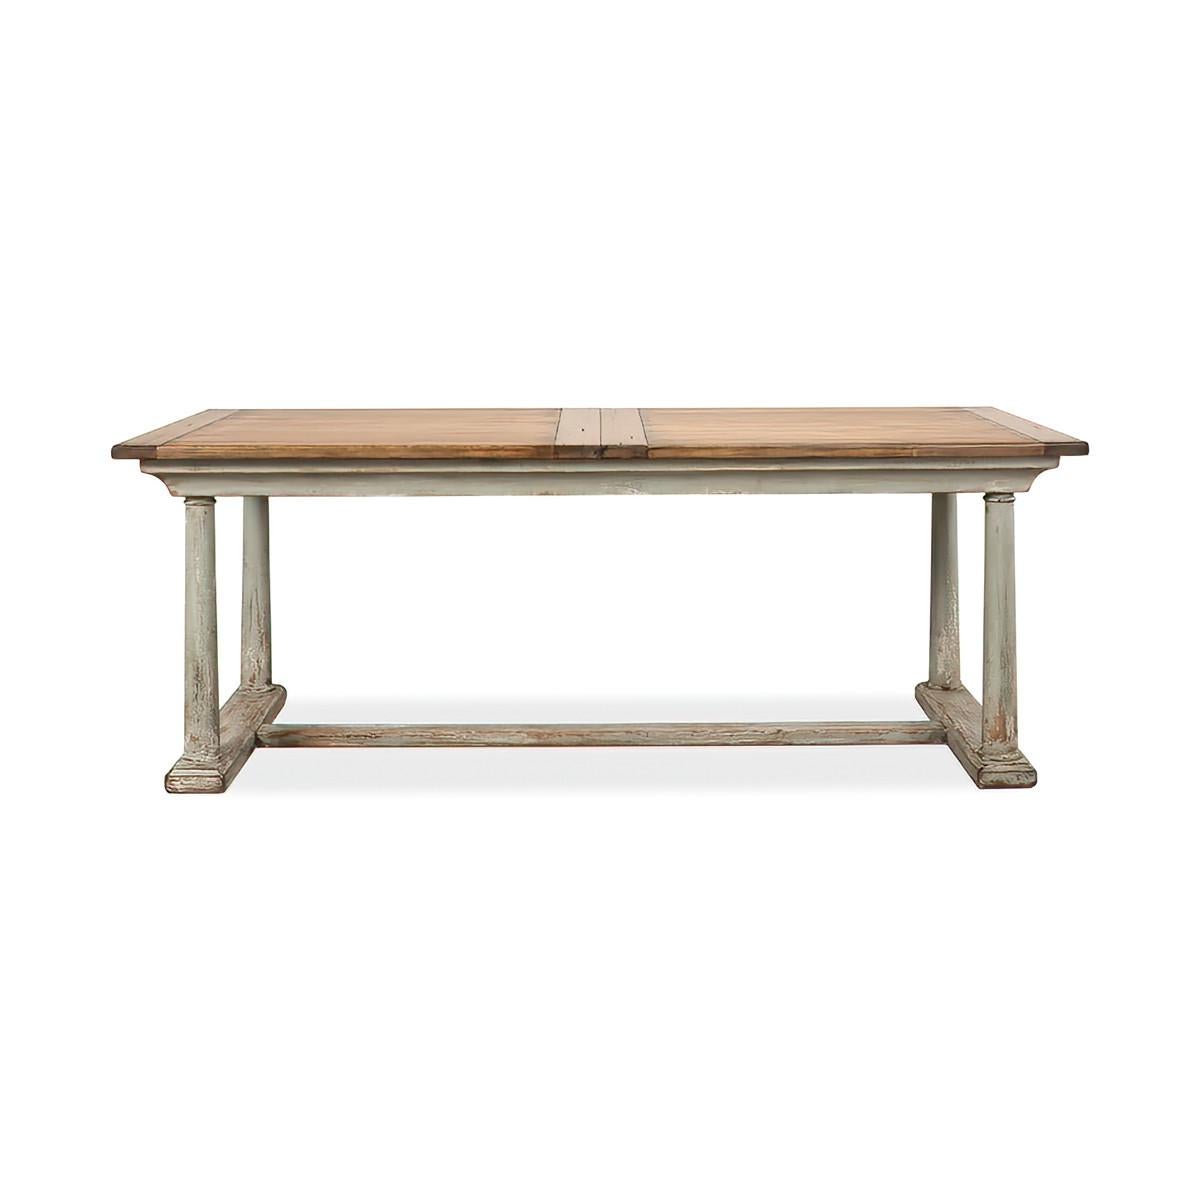 French Provincial Extension dining table with a draw leaf top, self-storing leaves on a sage-painted trestle end stretcher base.

Dimensions:
Open - 120